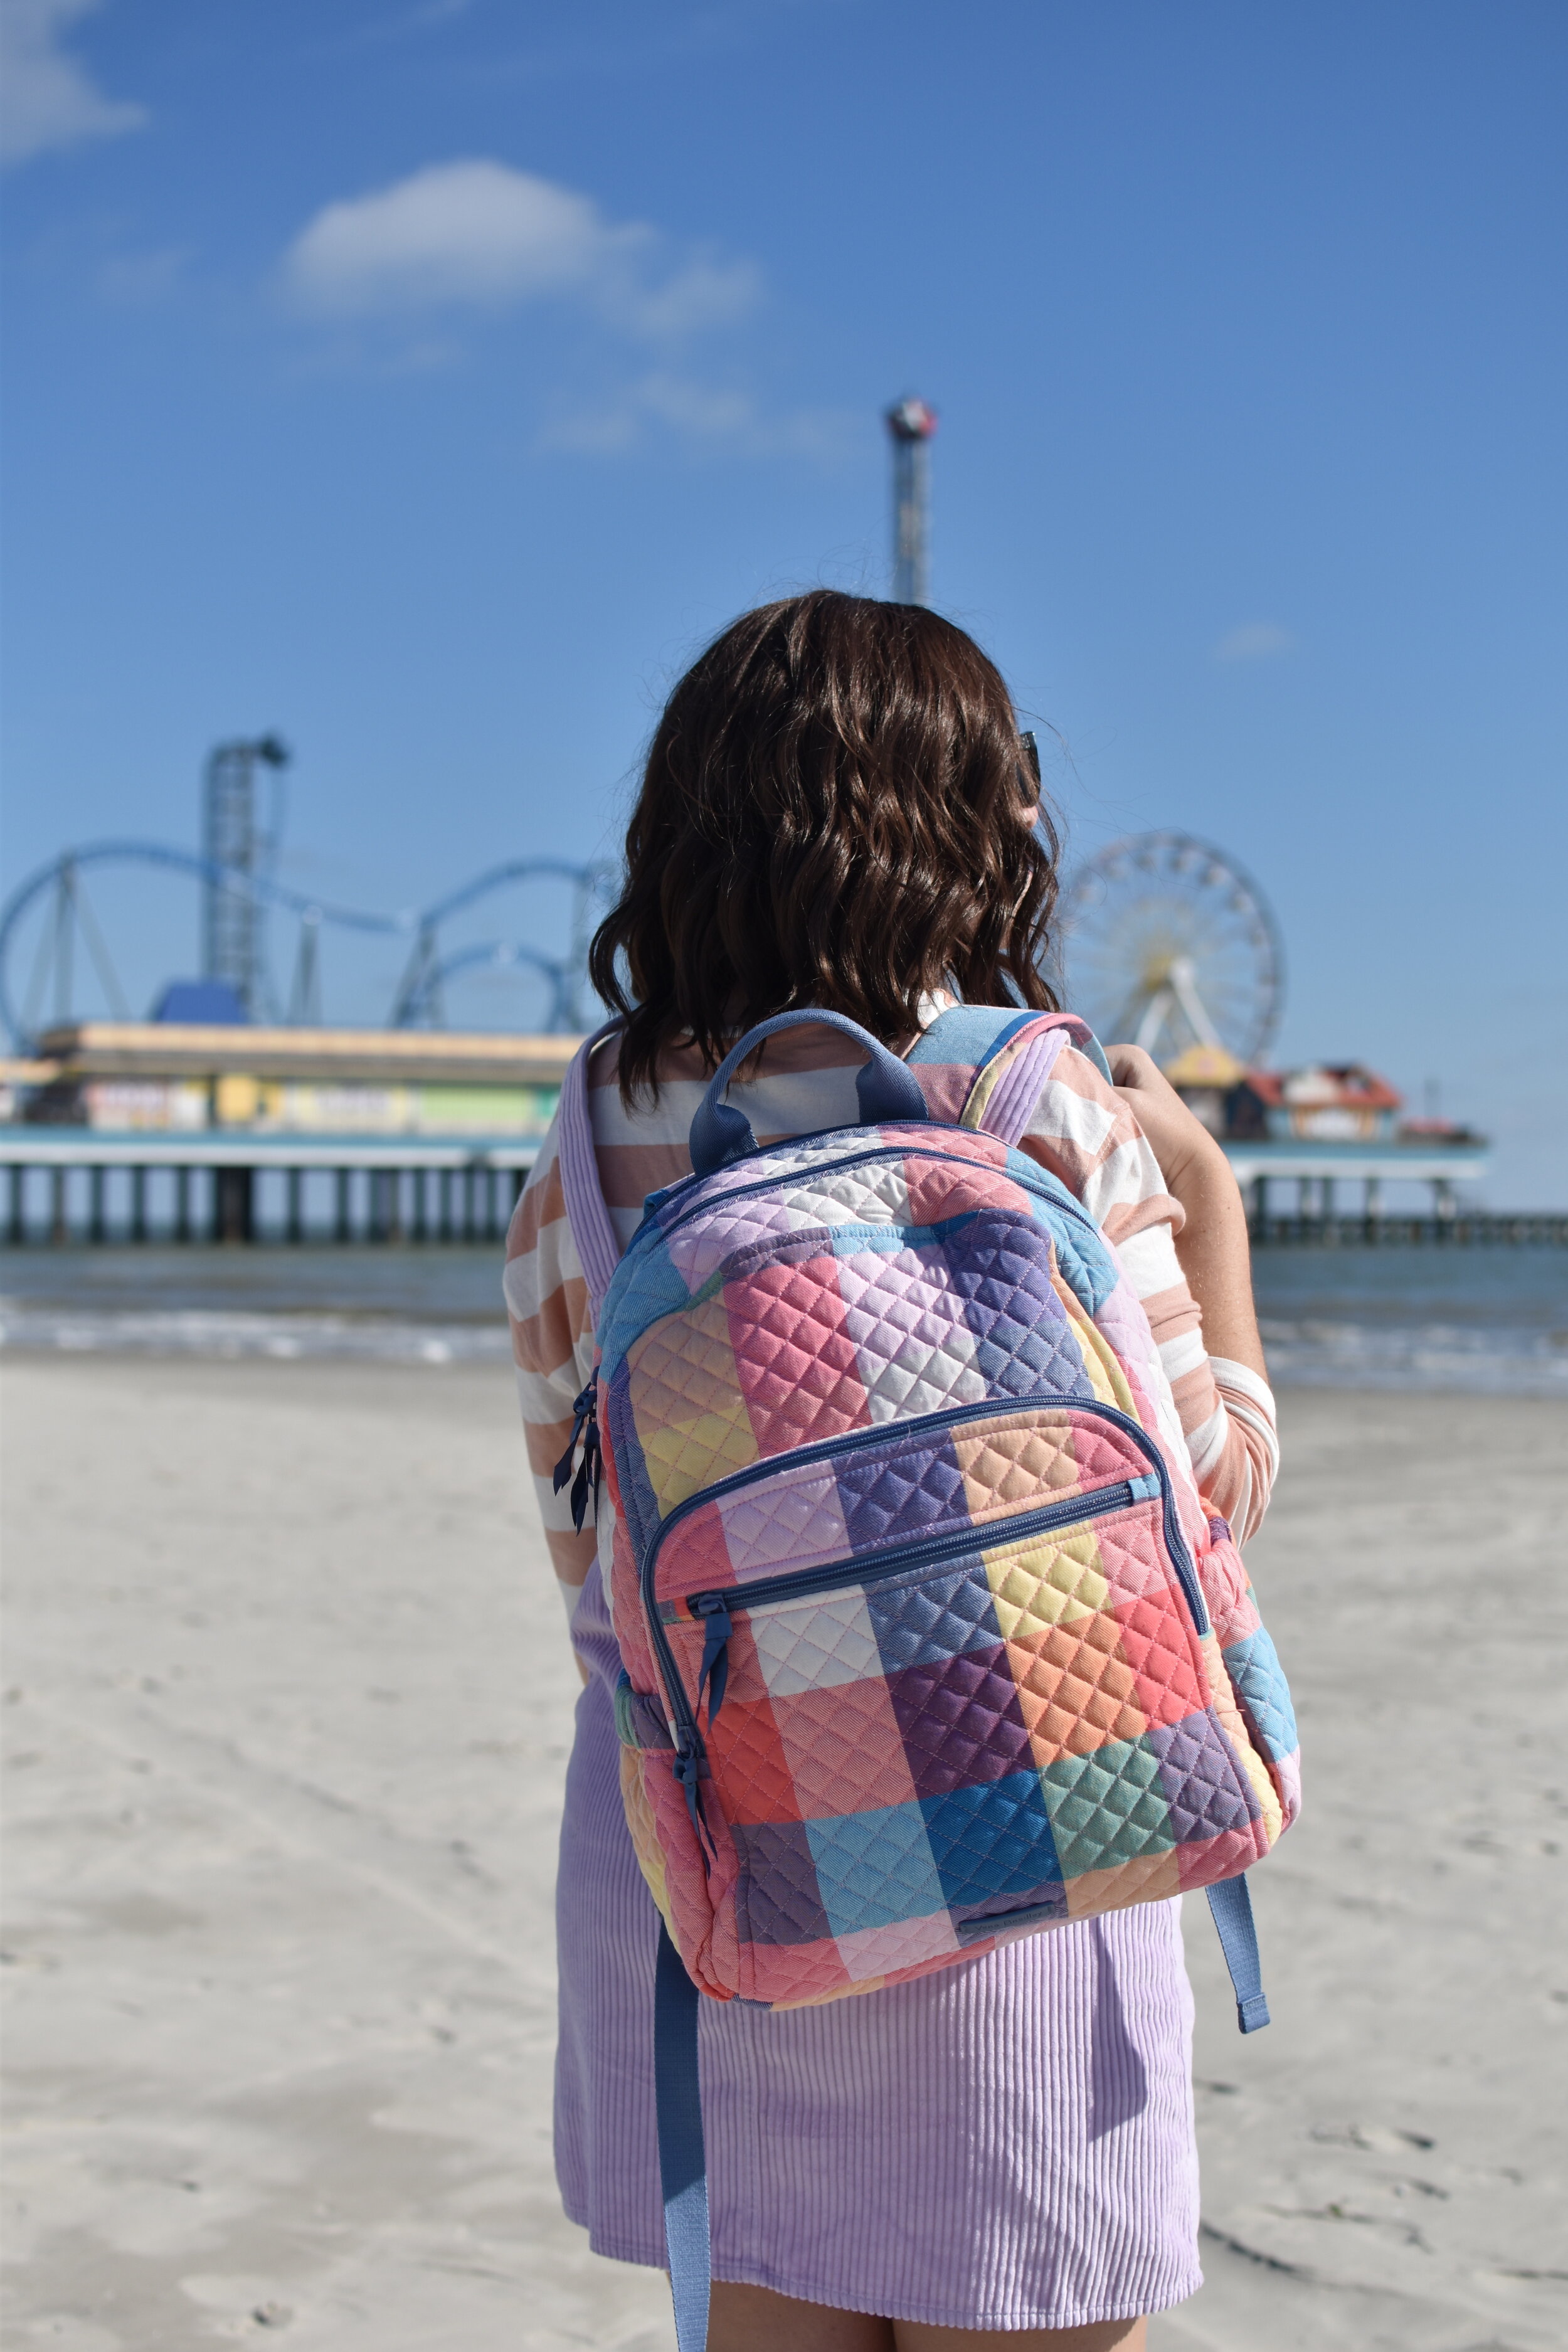 ALL THE DETAILS ON VERA BRADLEY'S SPRING 2021 COLLECTION